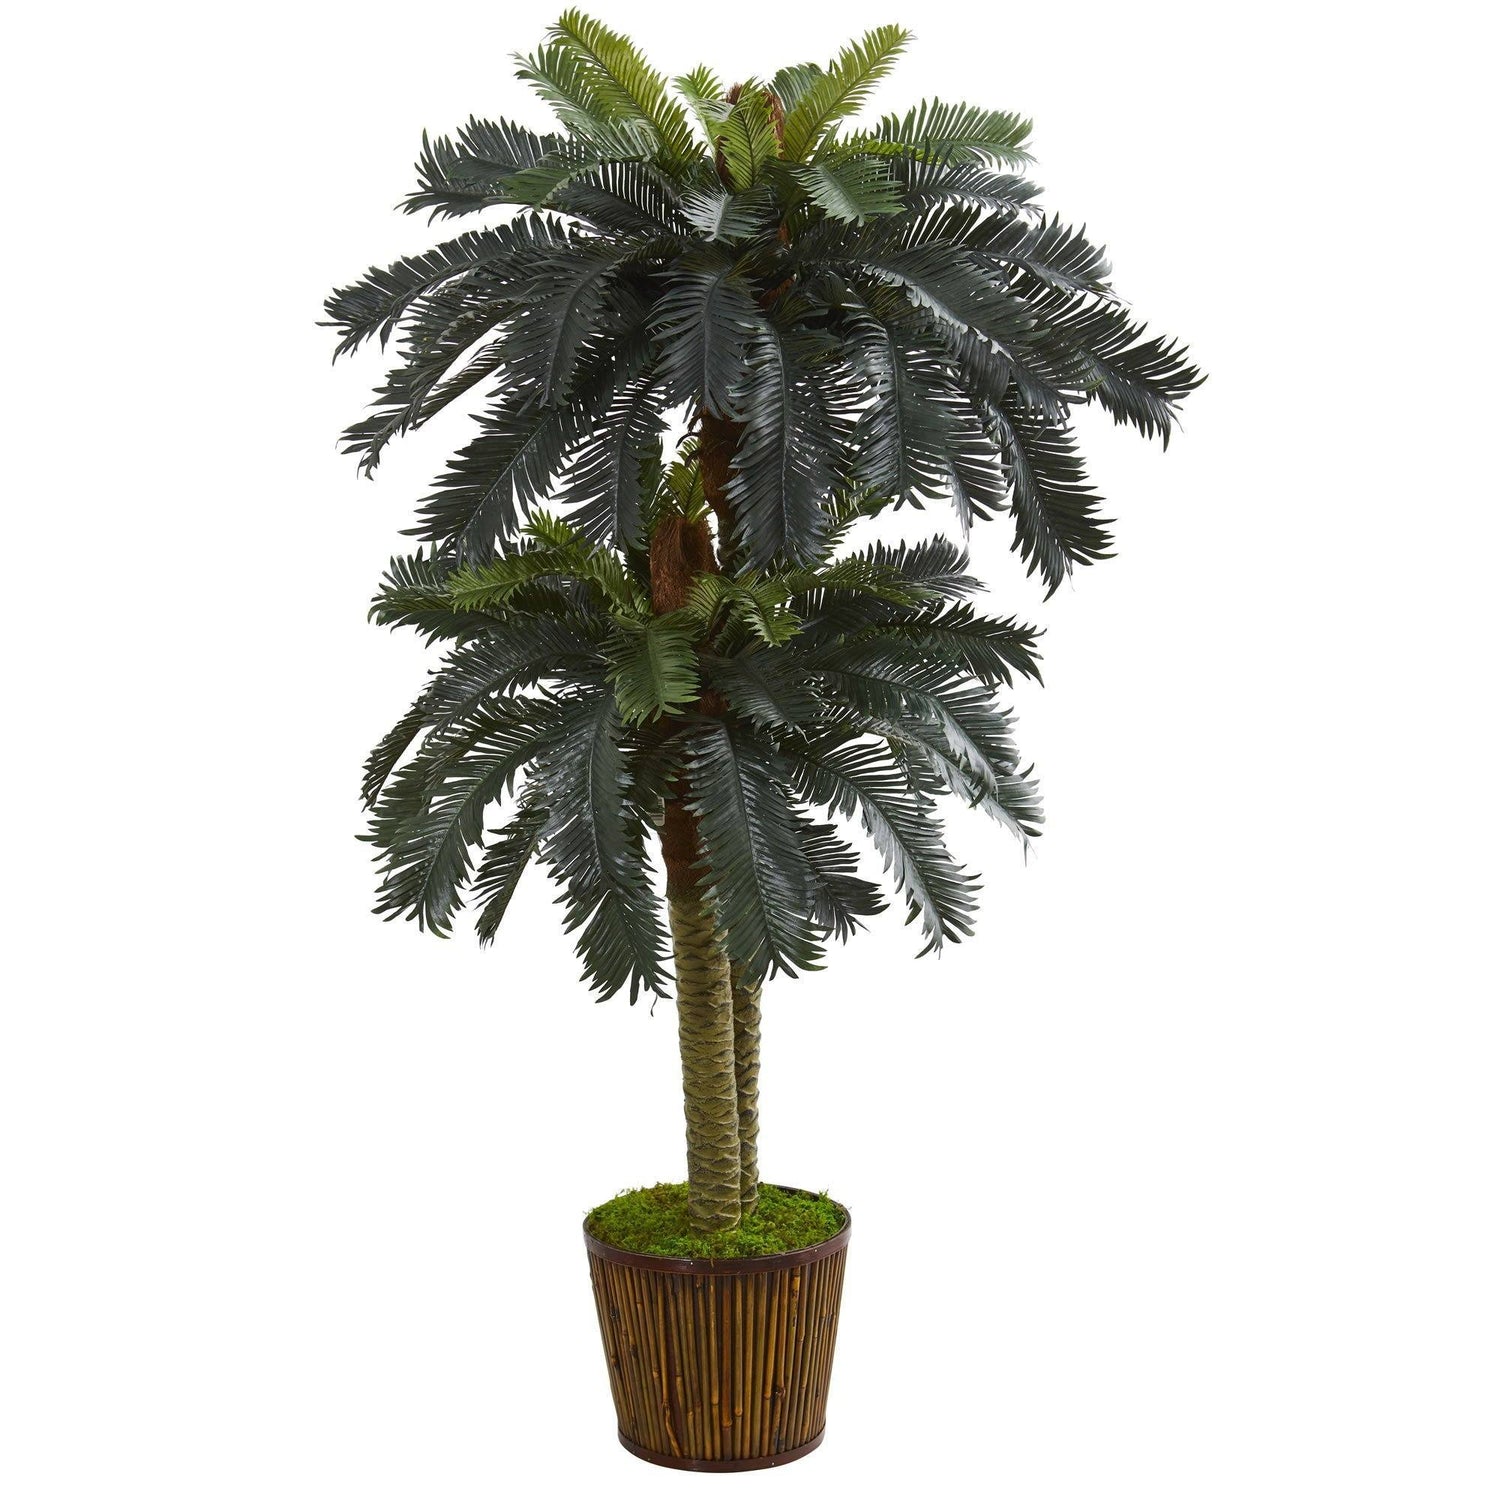 5.5’ Double Sago Palm Artificial Tree in Wood Planter